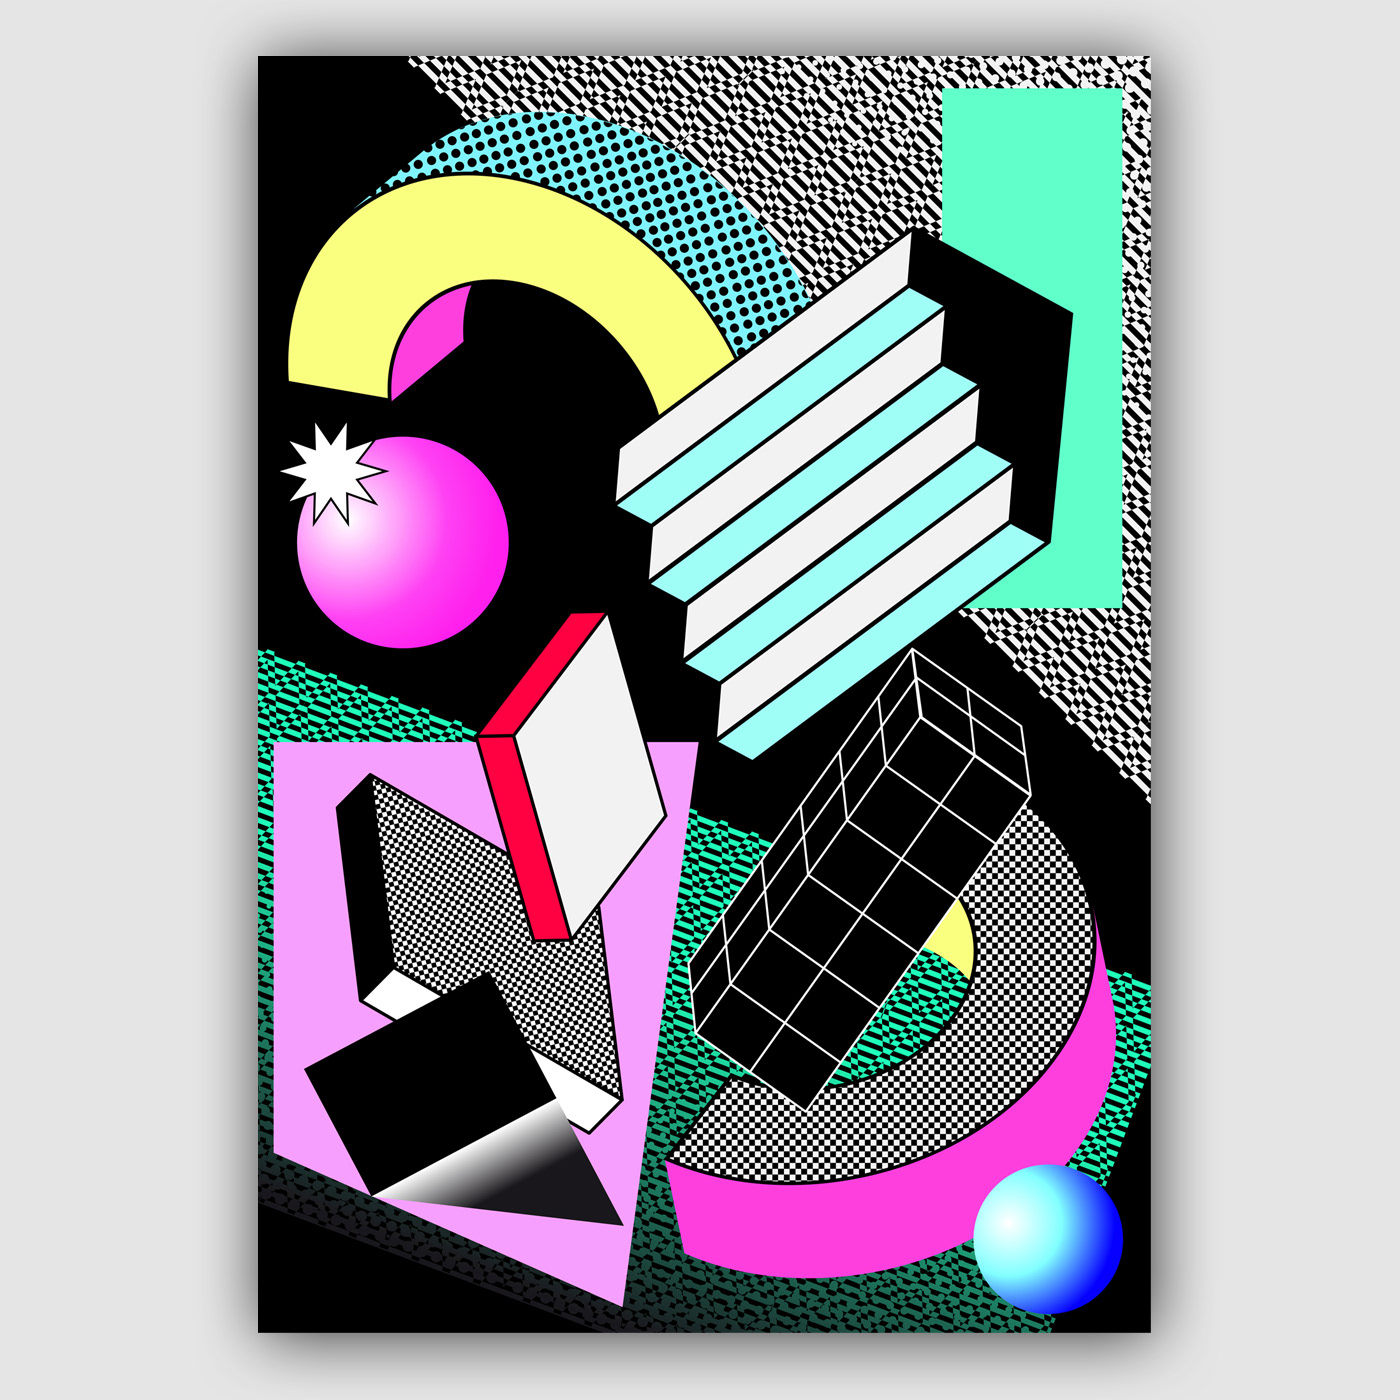 Posters and visuals based on graphic shapes and saturated colors